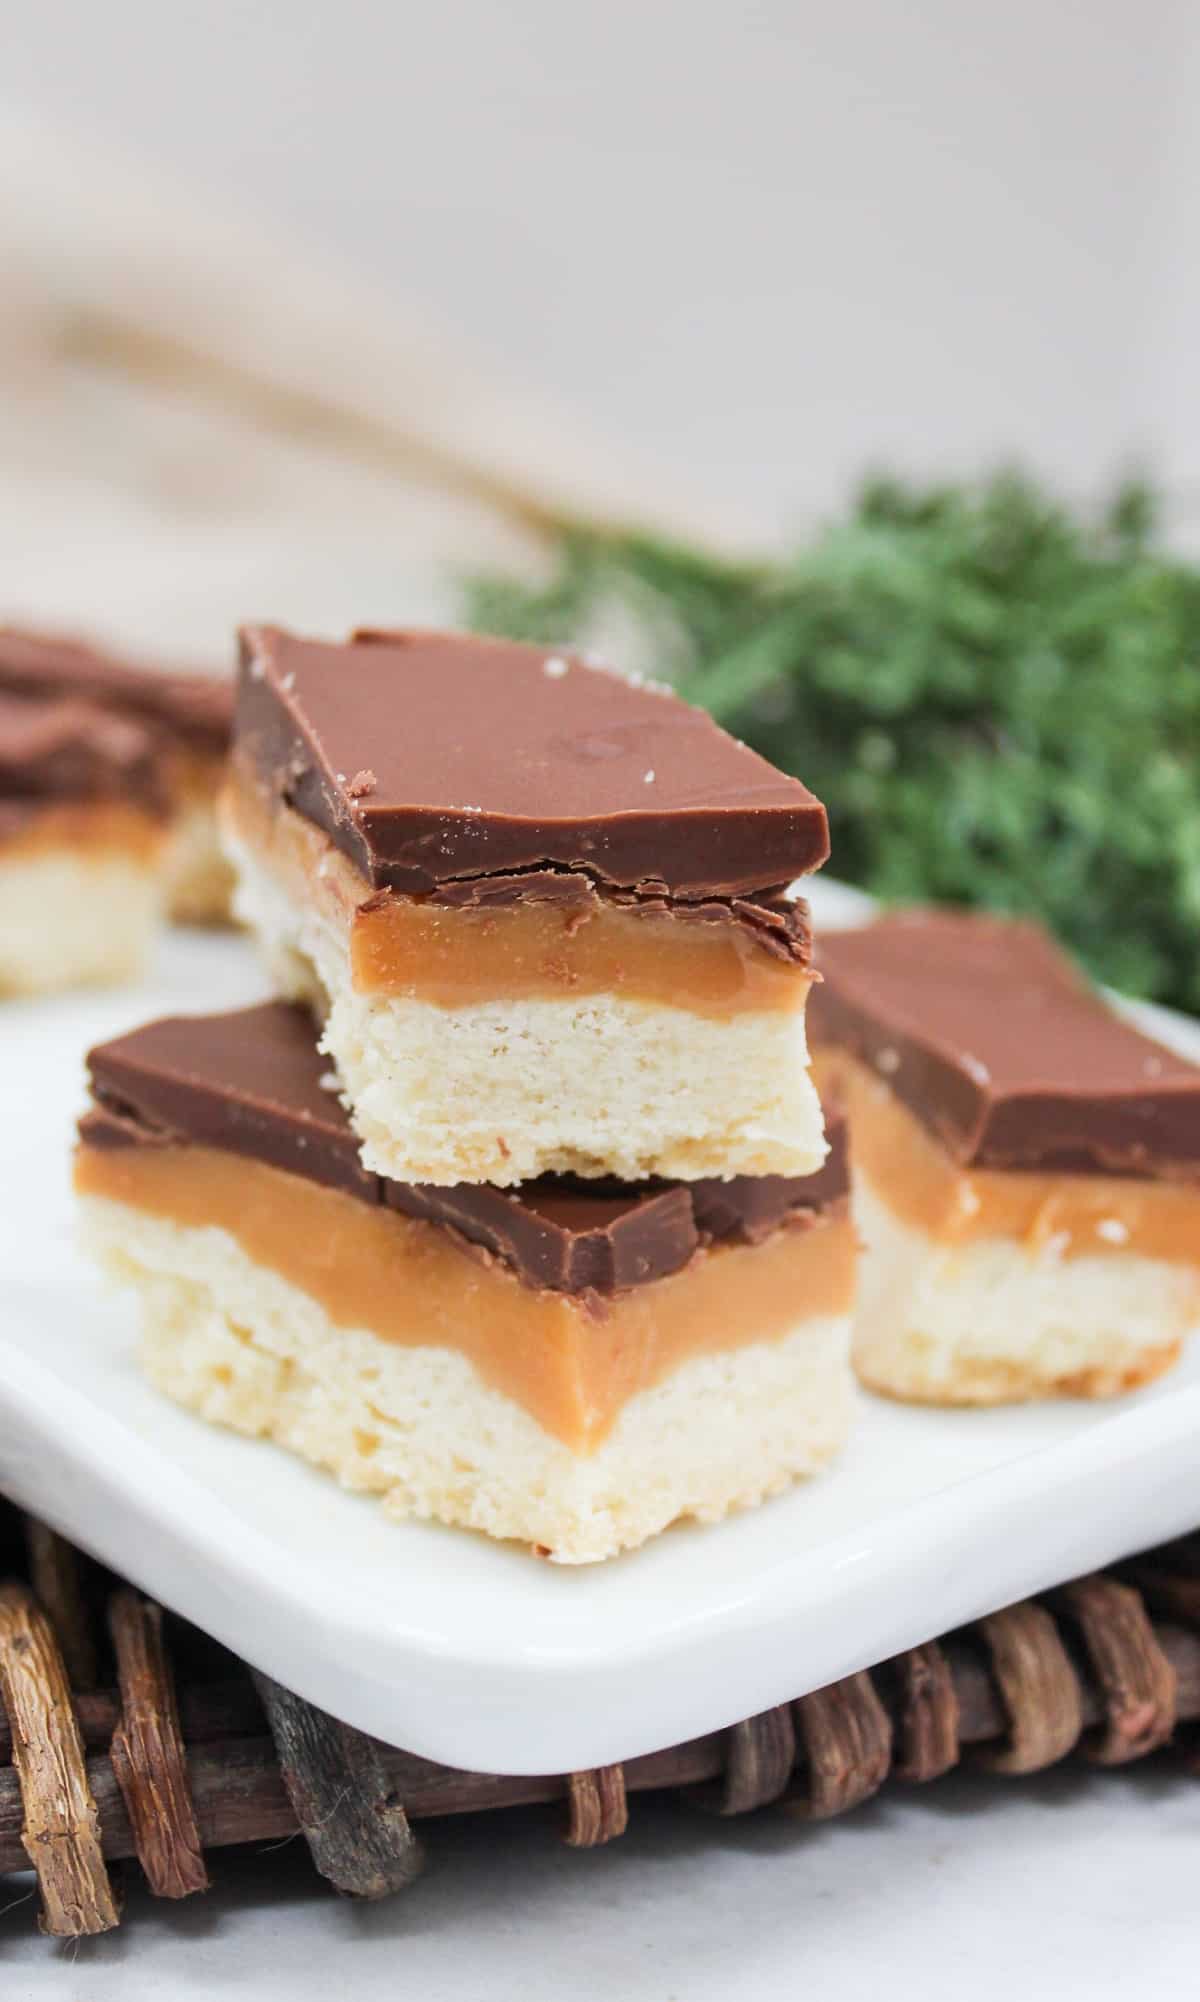 Cookie style bars cut into rectangles. The bars are layers wit h shortbread on the bottom, then caramel, and chocolate on top. The bars are stacked on top of each other.